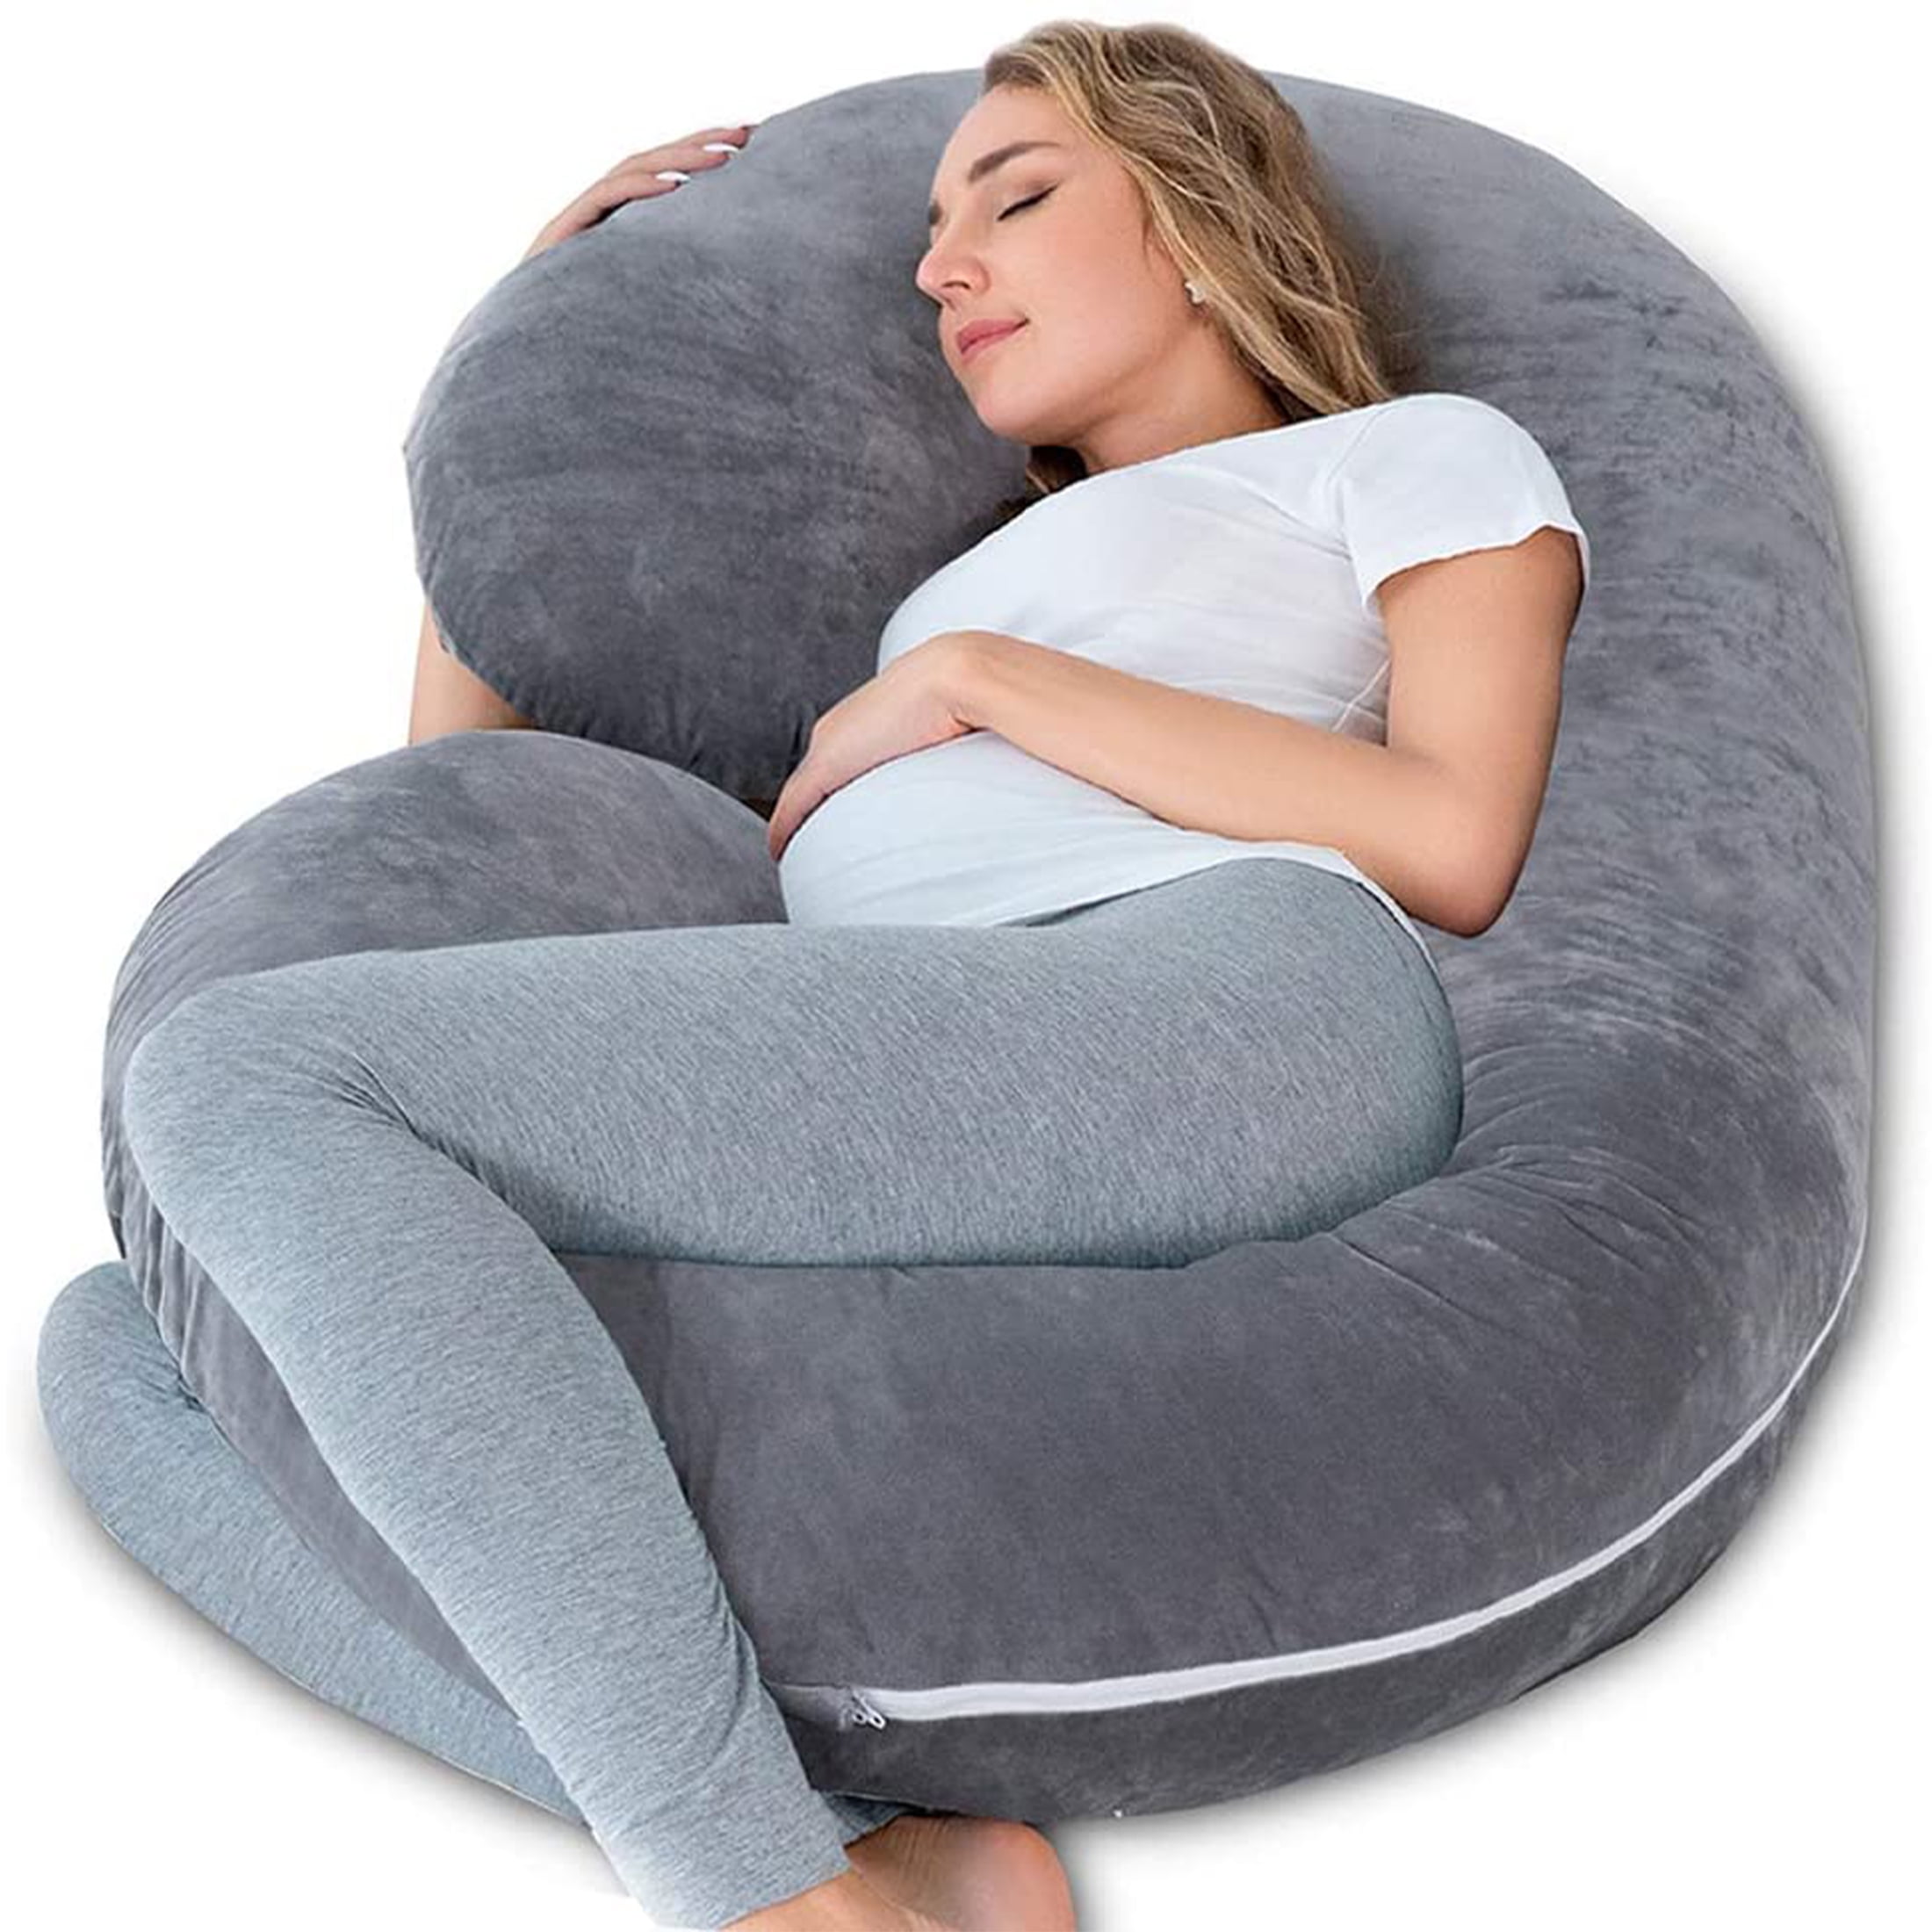 Pregnancy Pillow,Queen Rose Maternity Body Pillow for Sleeping, C Shaped  Body Pillow for Pregnant Women with Removable Green Jersey Cover